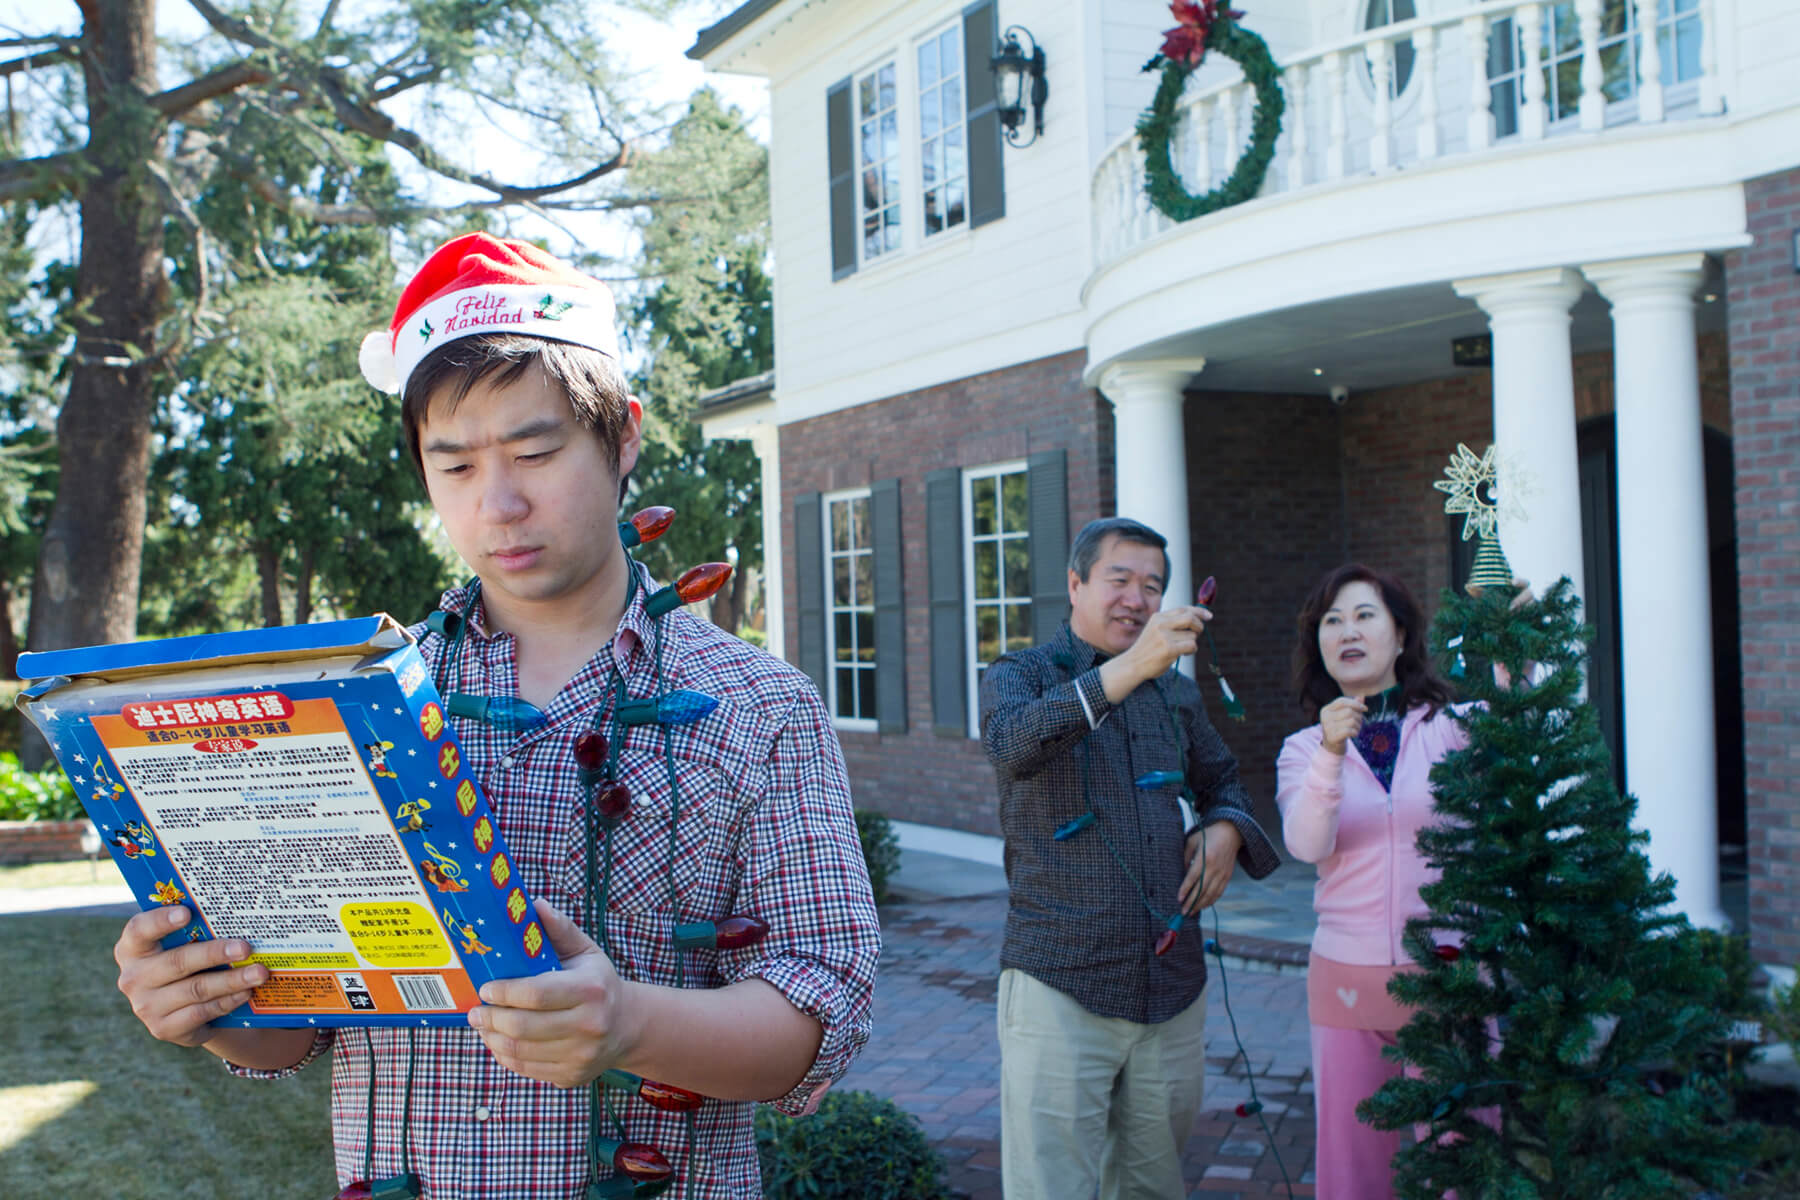 Still from Xmas Without China. A man stands outside holding a small box, with Christmas lights around his neck. He wears a Santa hat and a plaid shirt. An older man and women stand behind him in front of a white and brick home with a Christmas wreath on it.